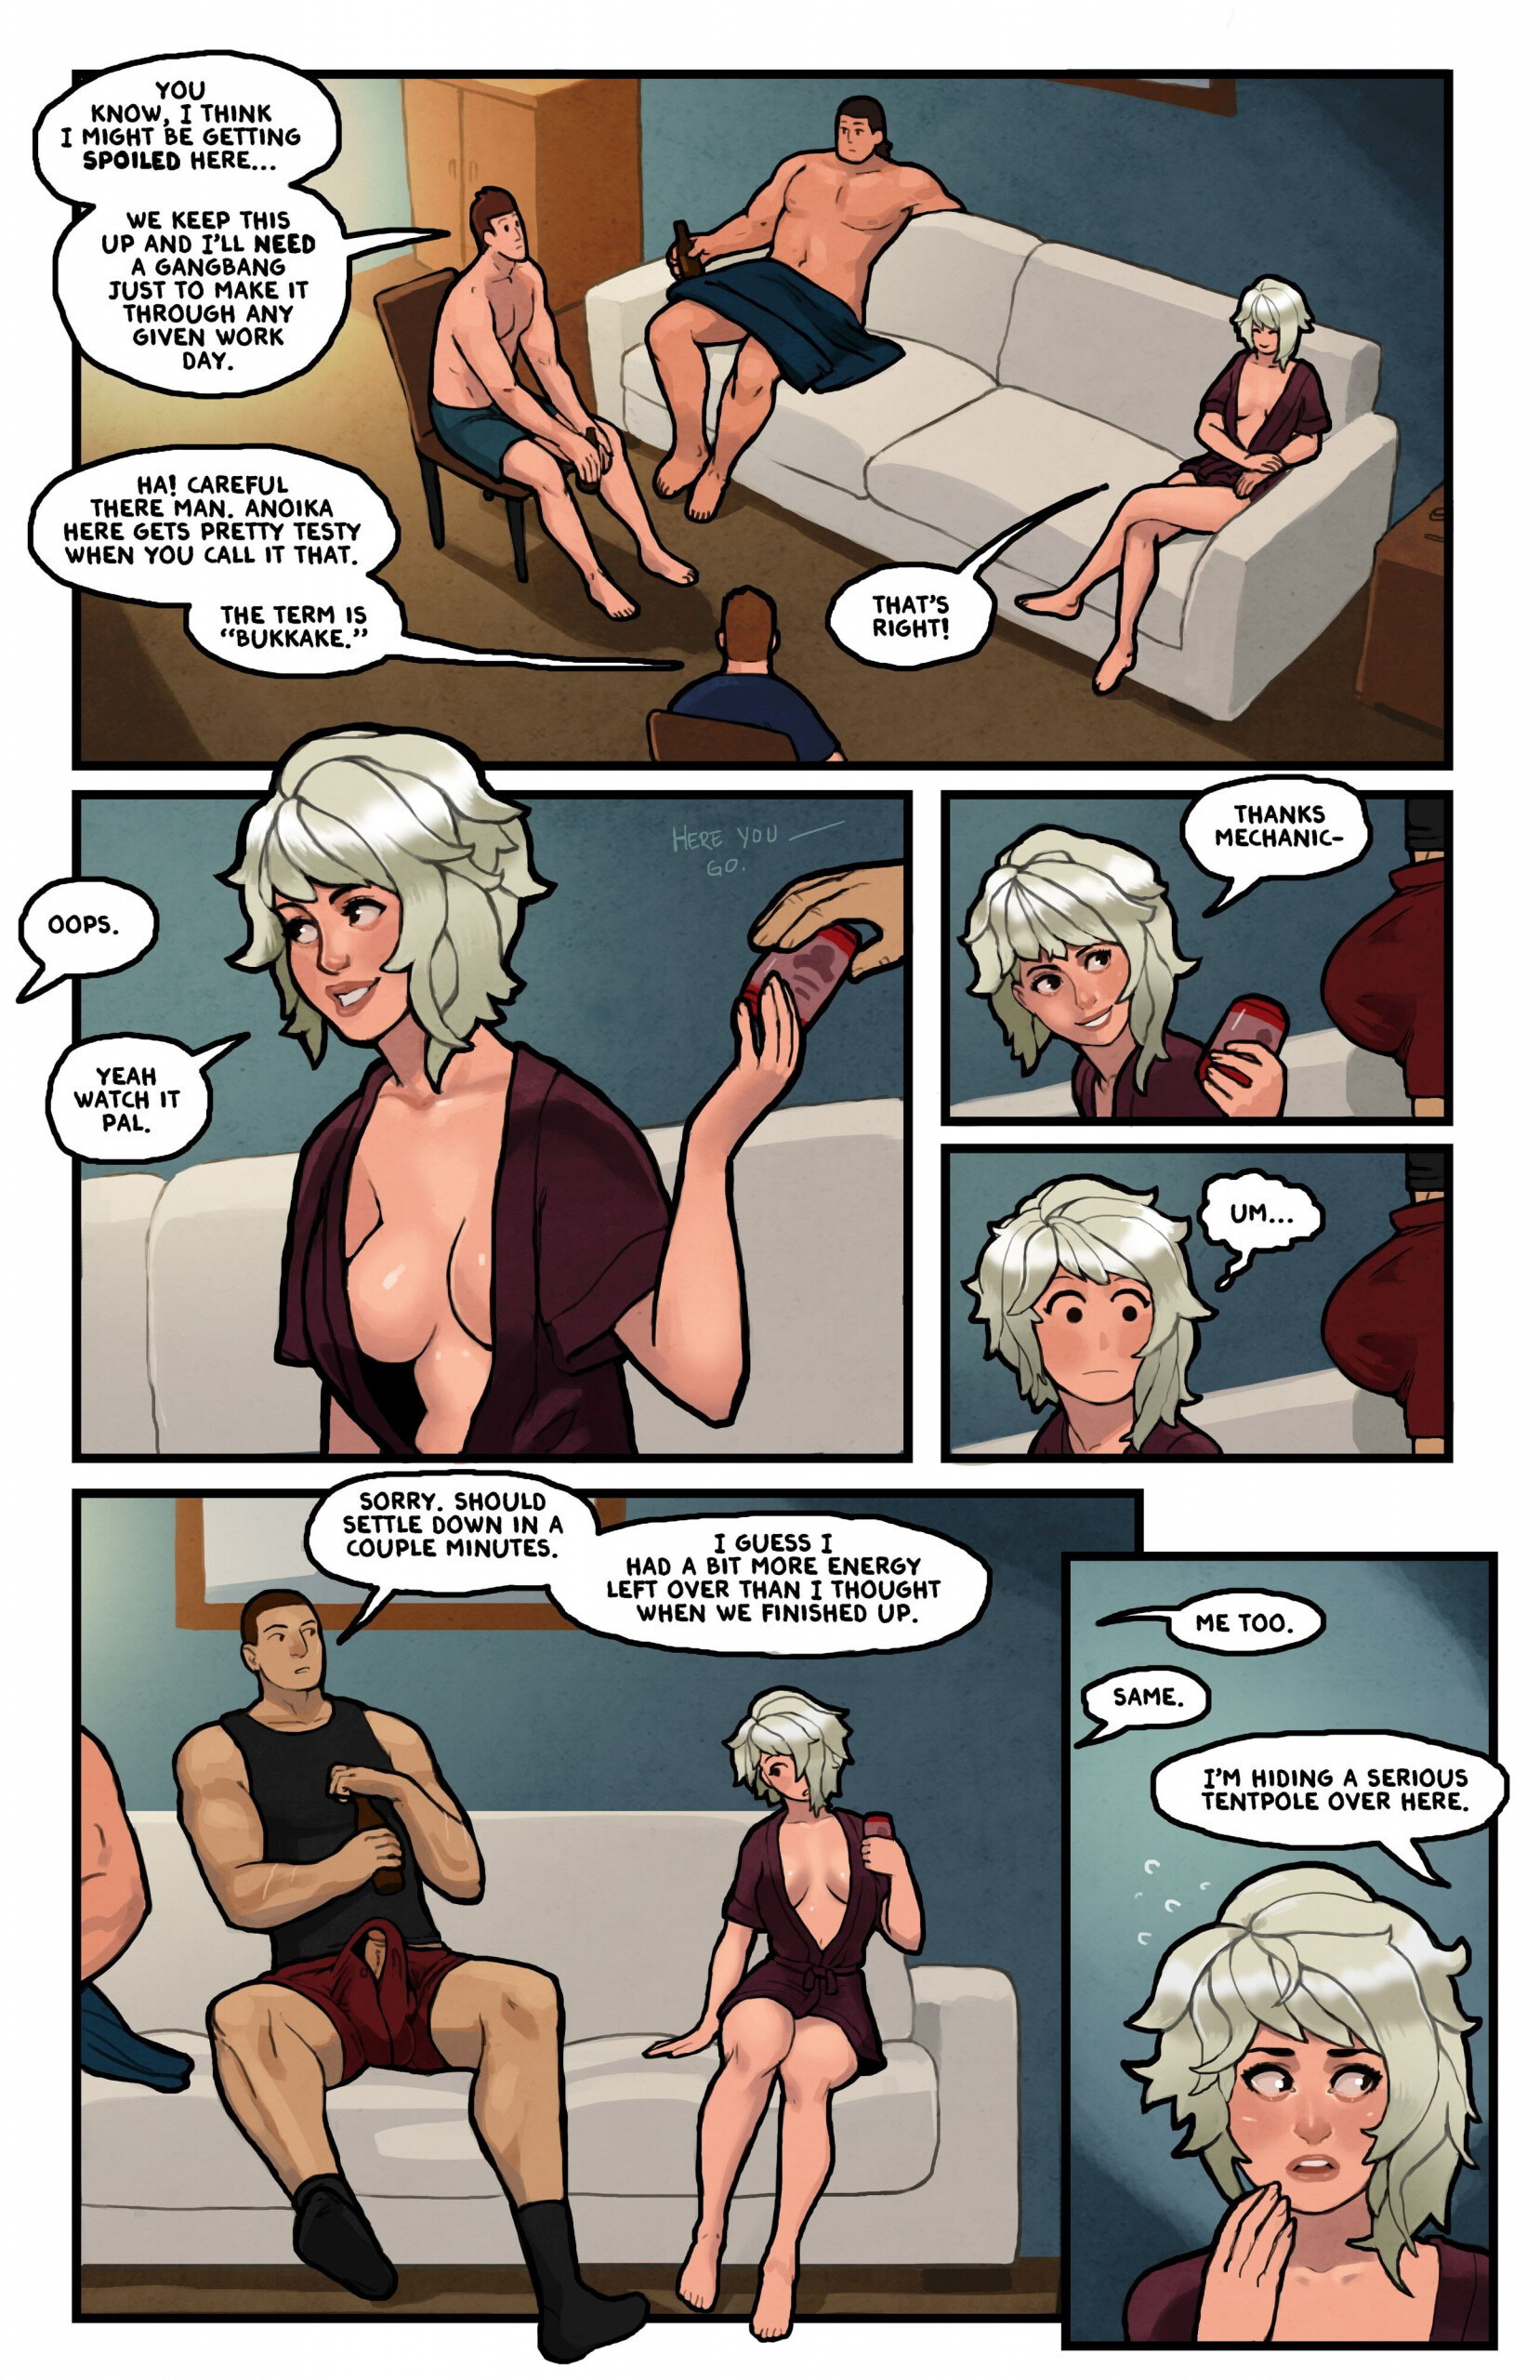 This Romantic World - Page 166